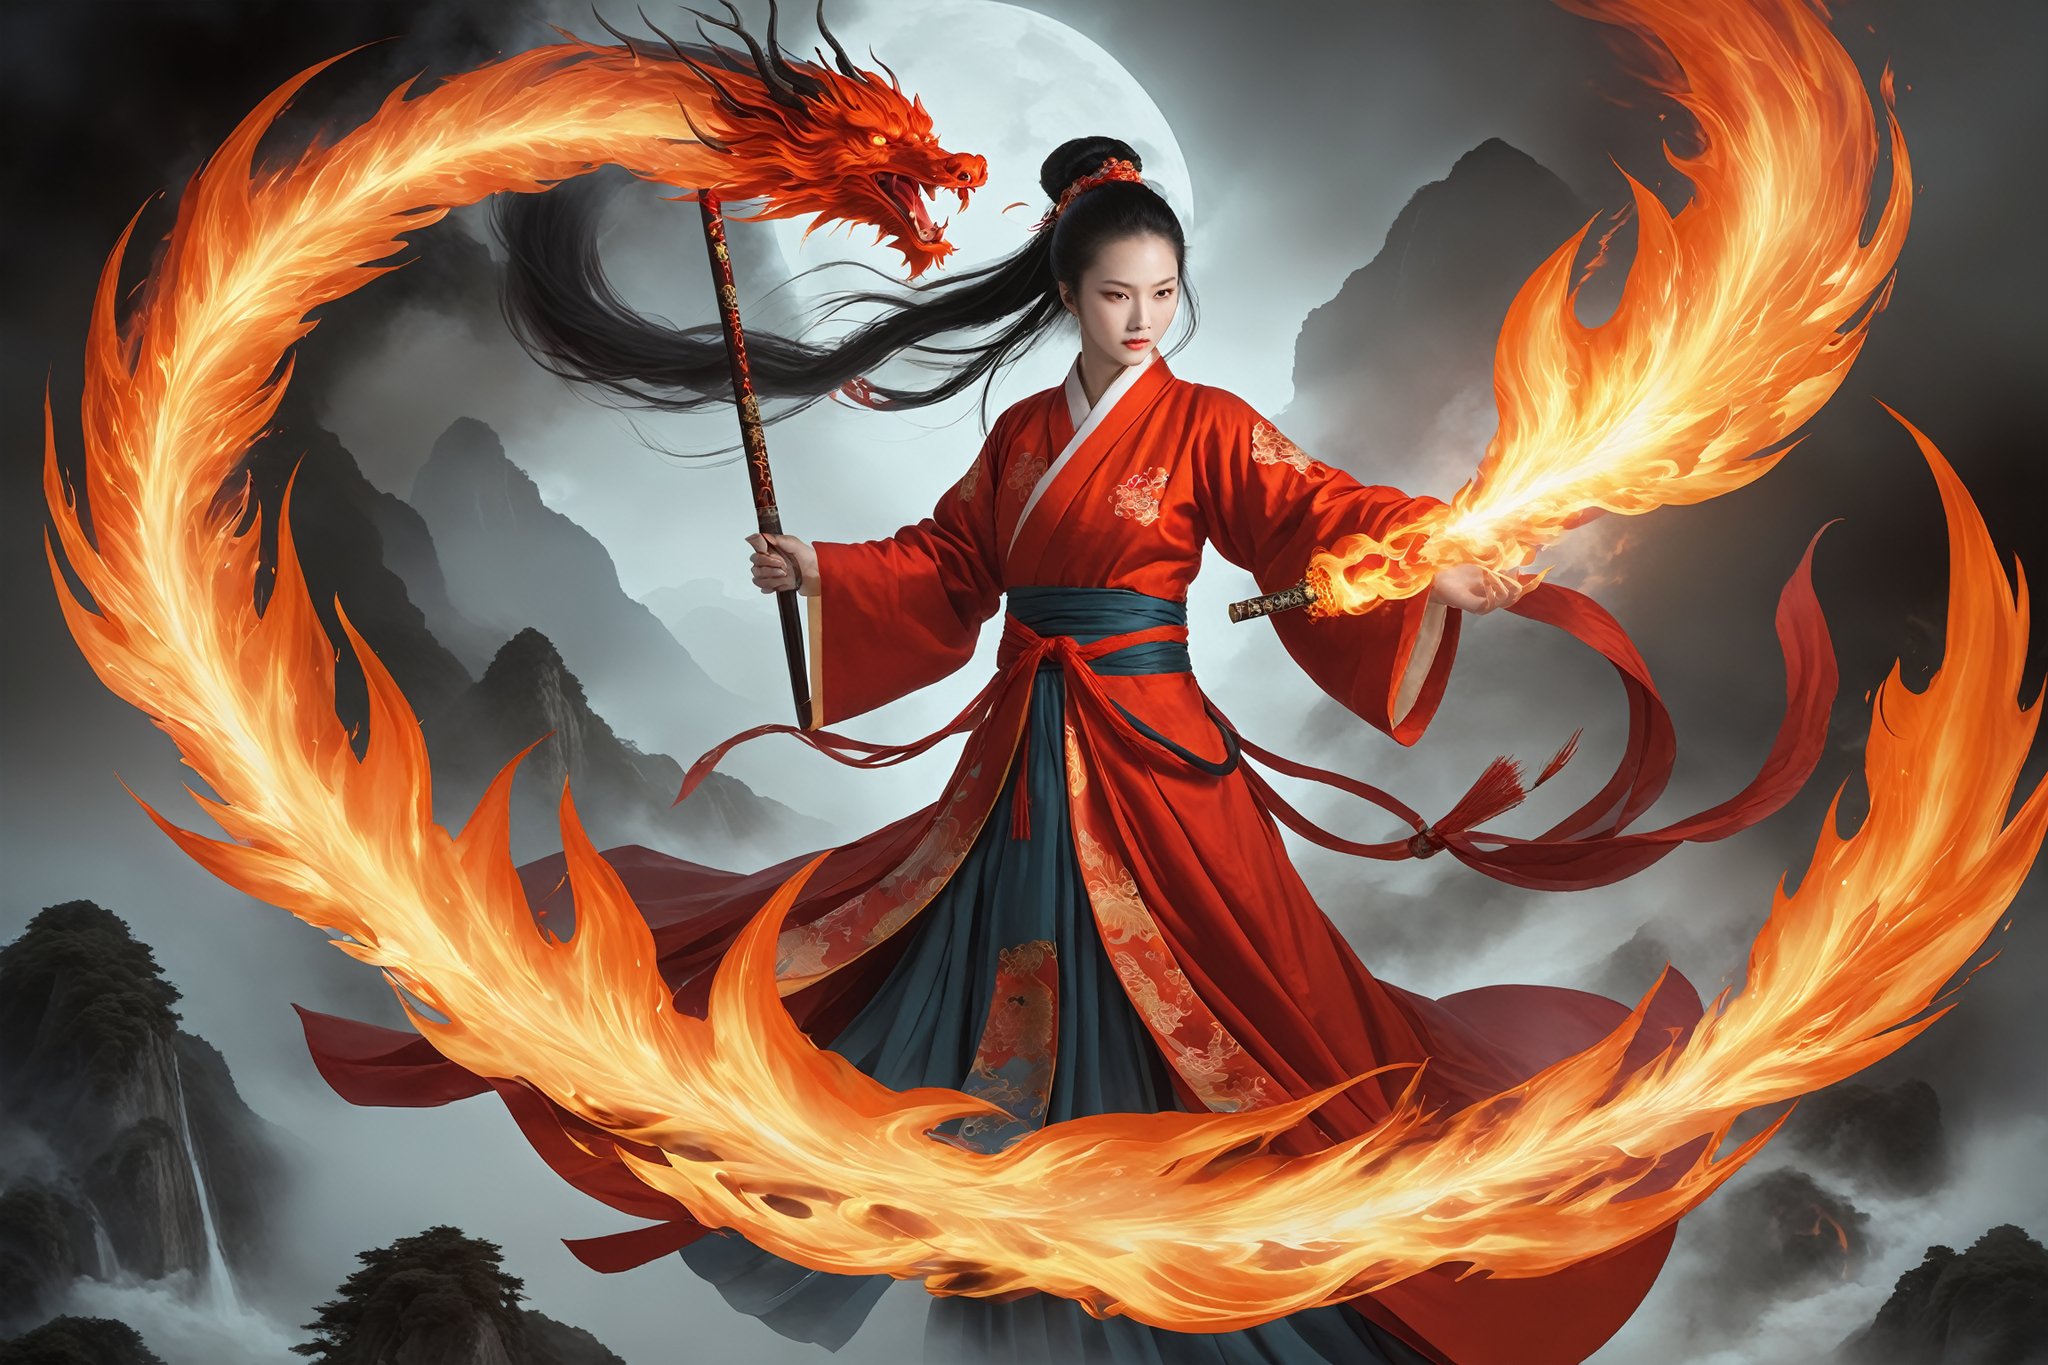 In Chinese mythology, the gods displayed red flame magic weapons, and the flames were blazing.